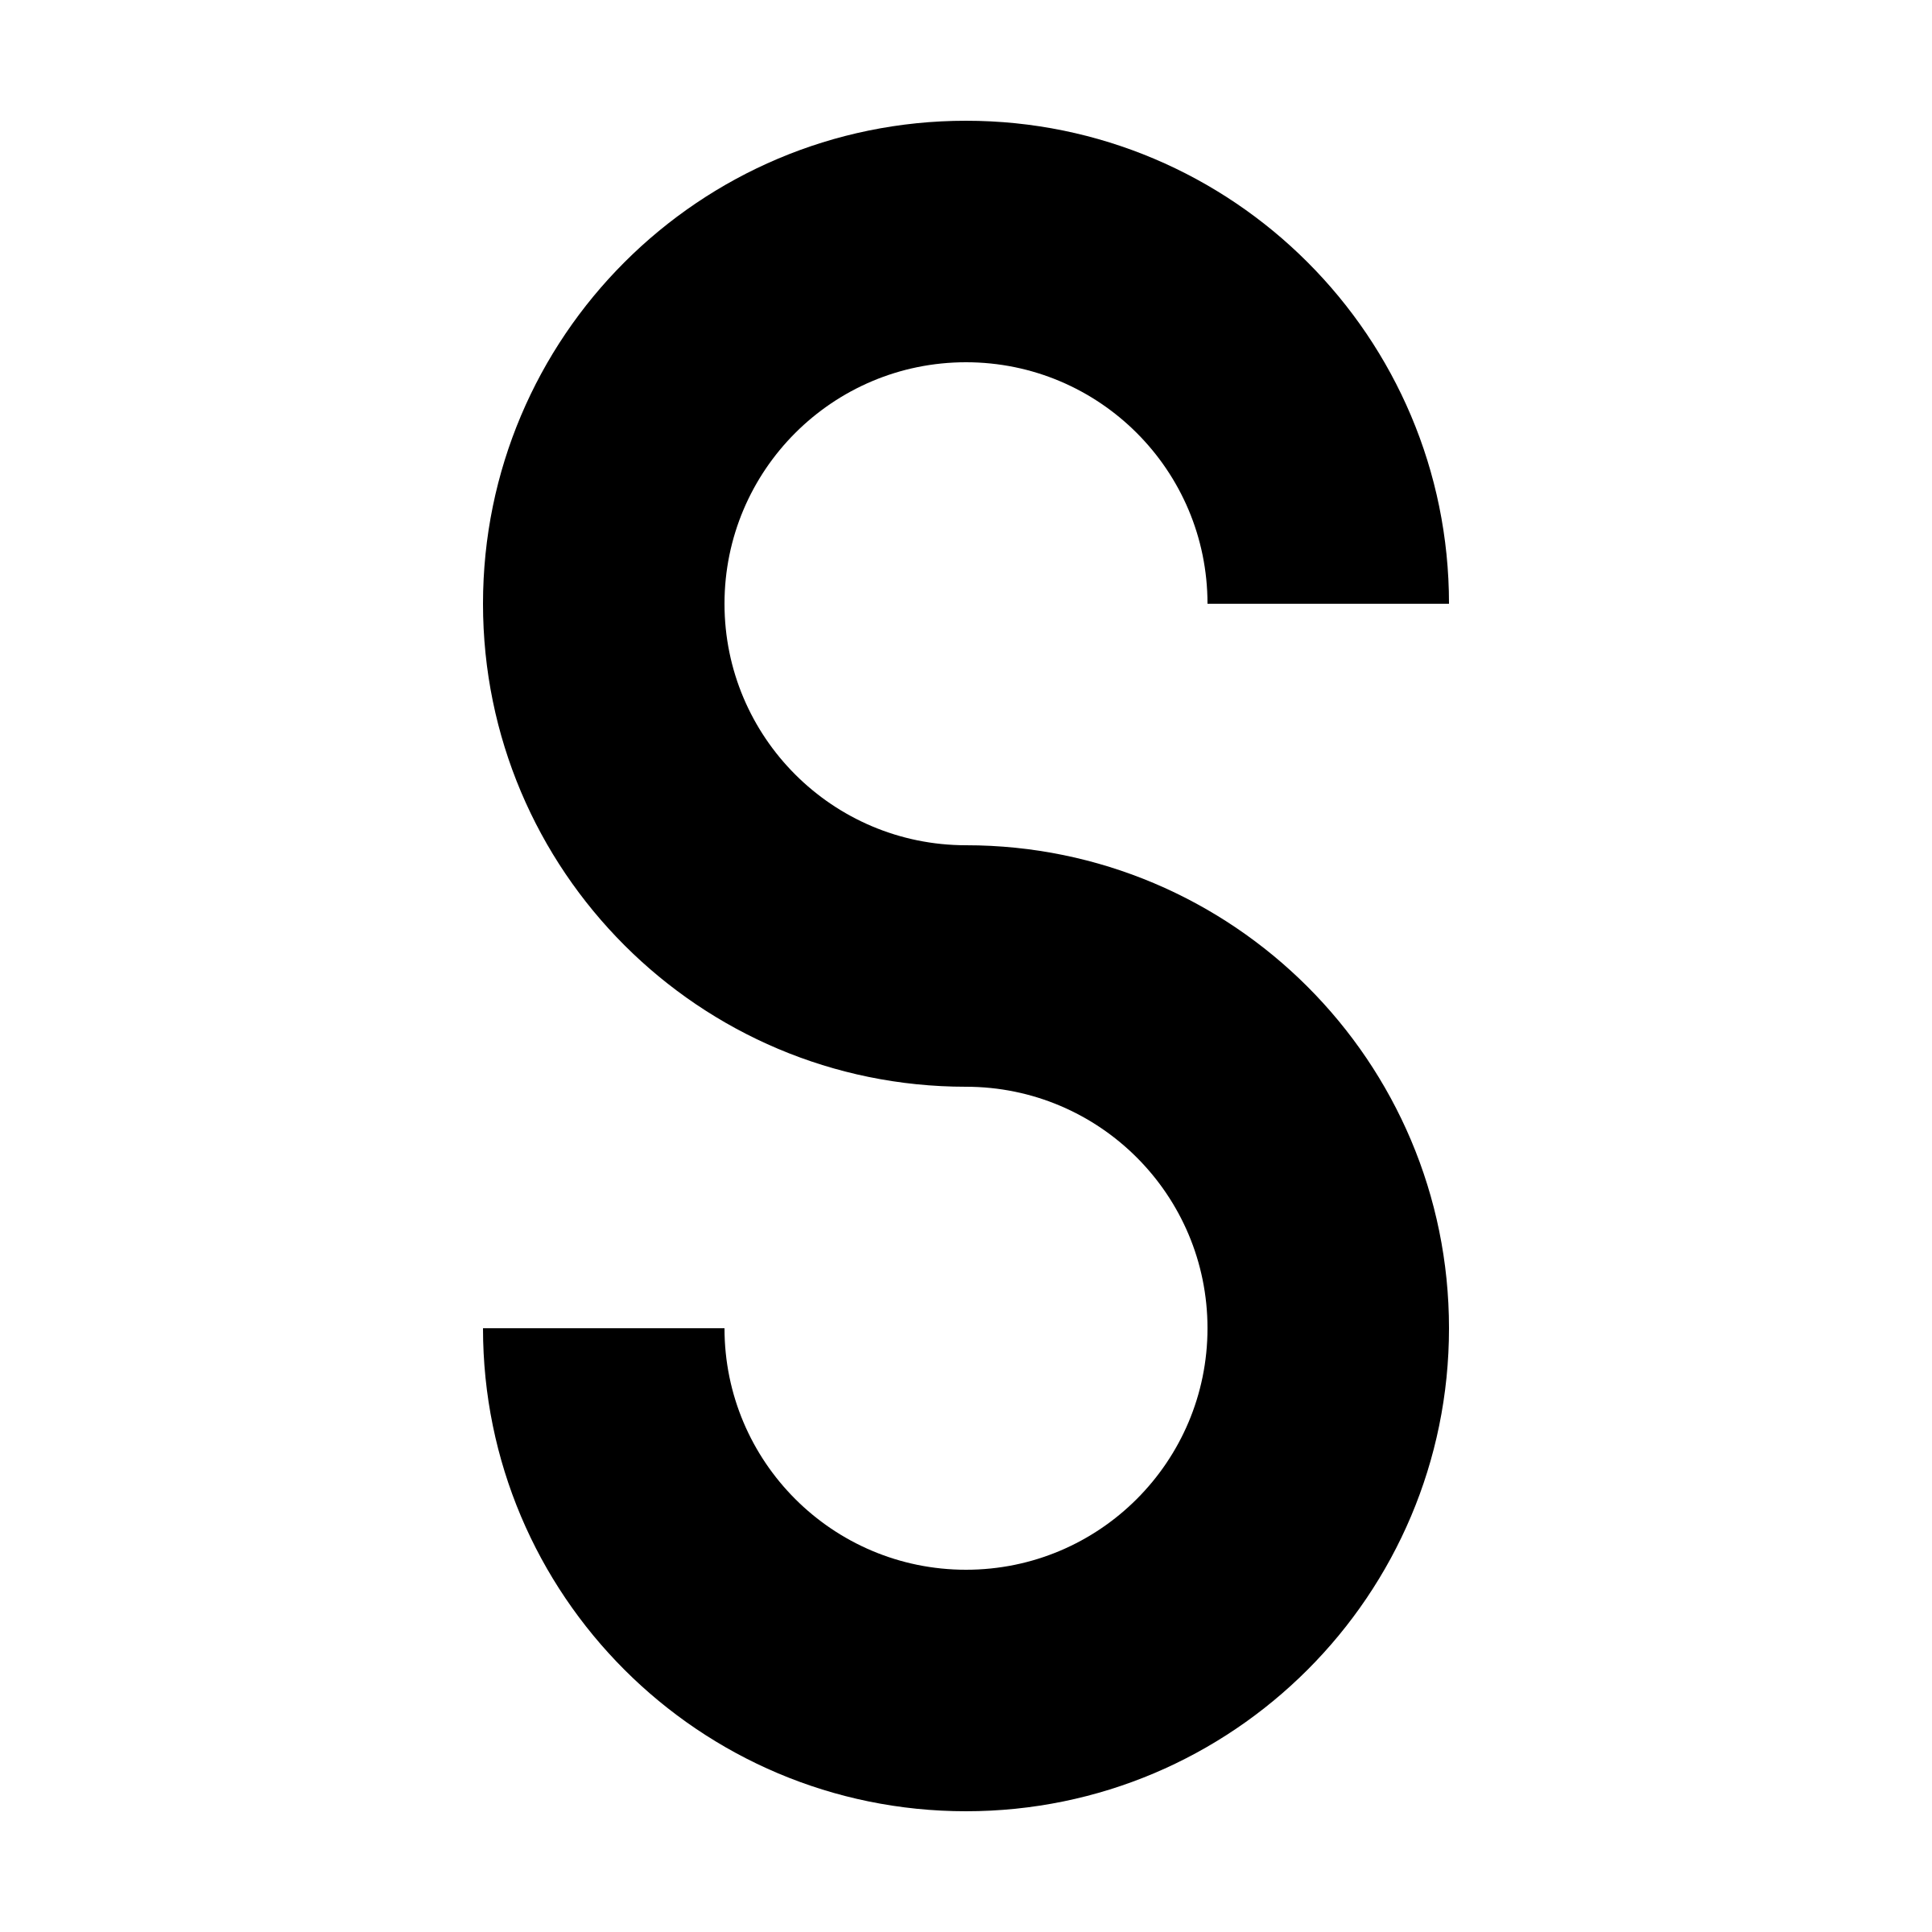 The letter s clipart